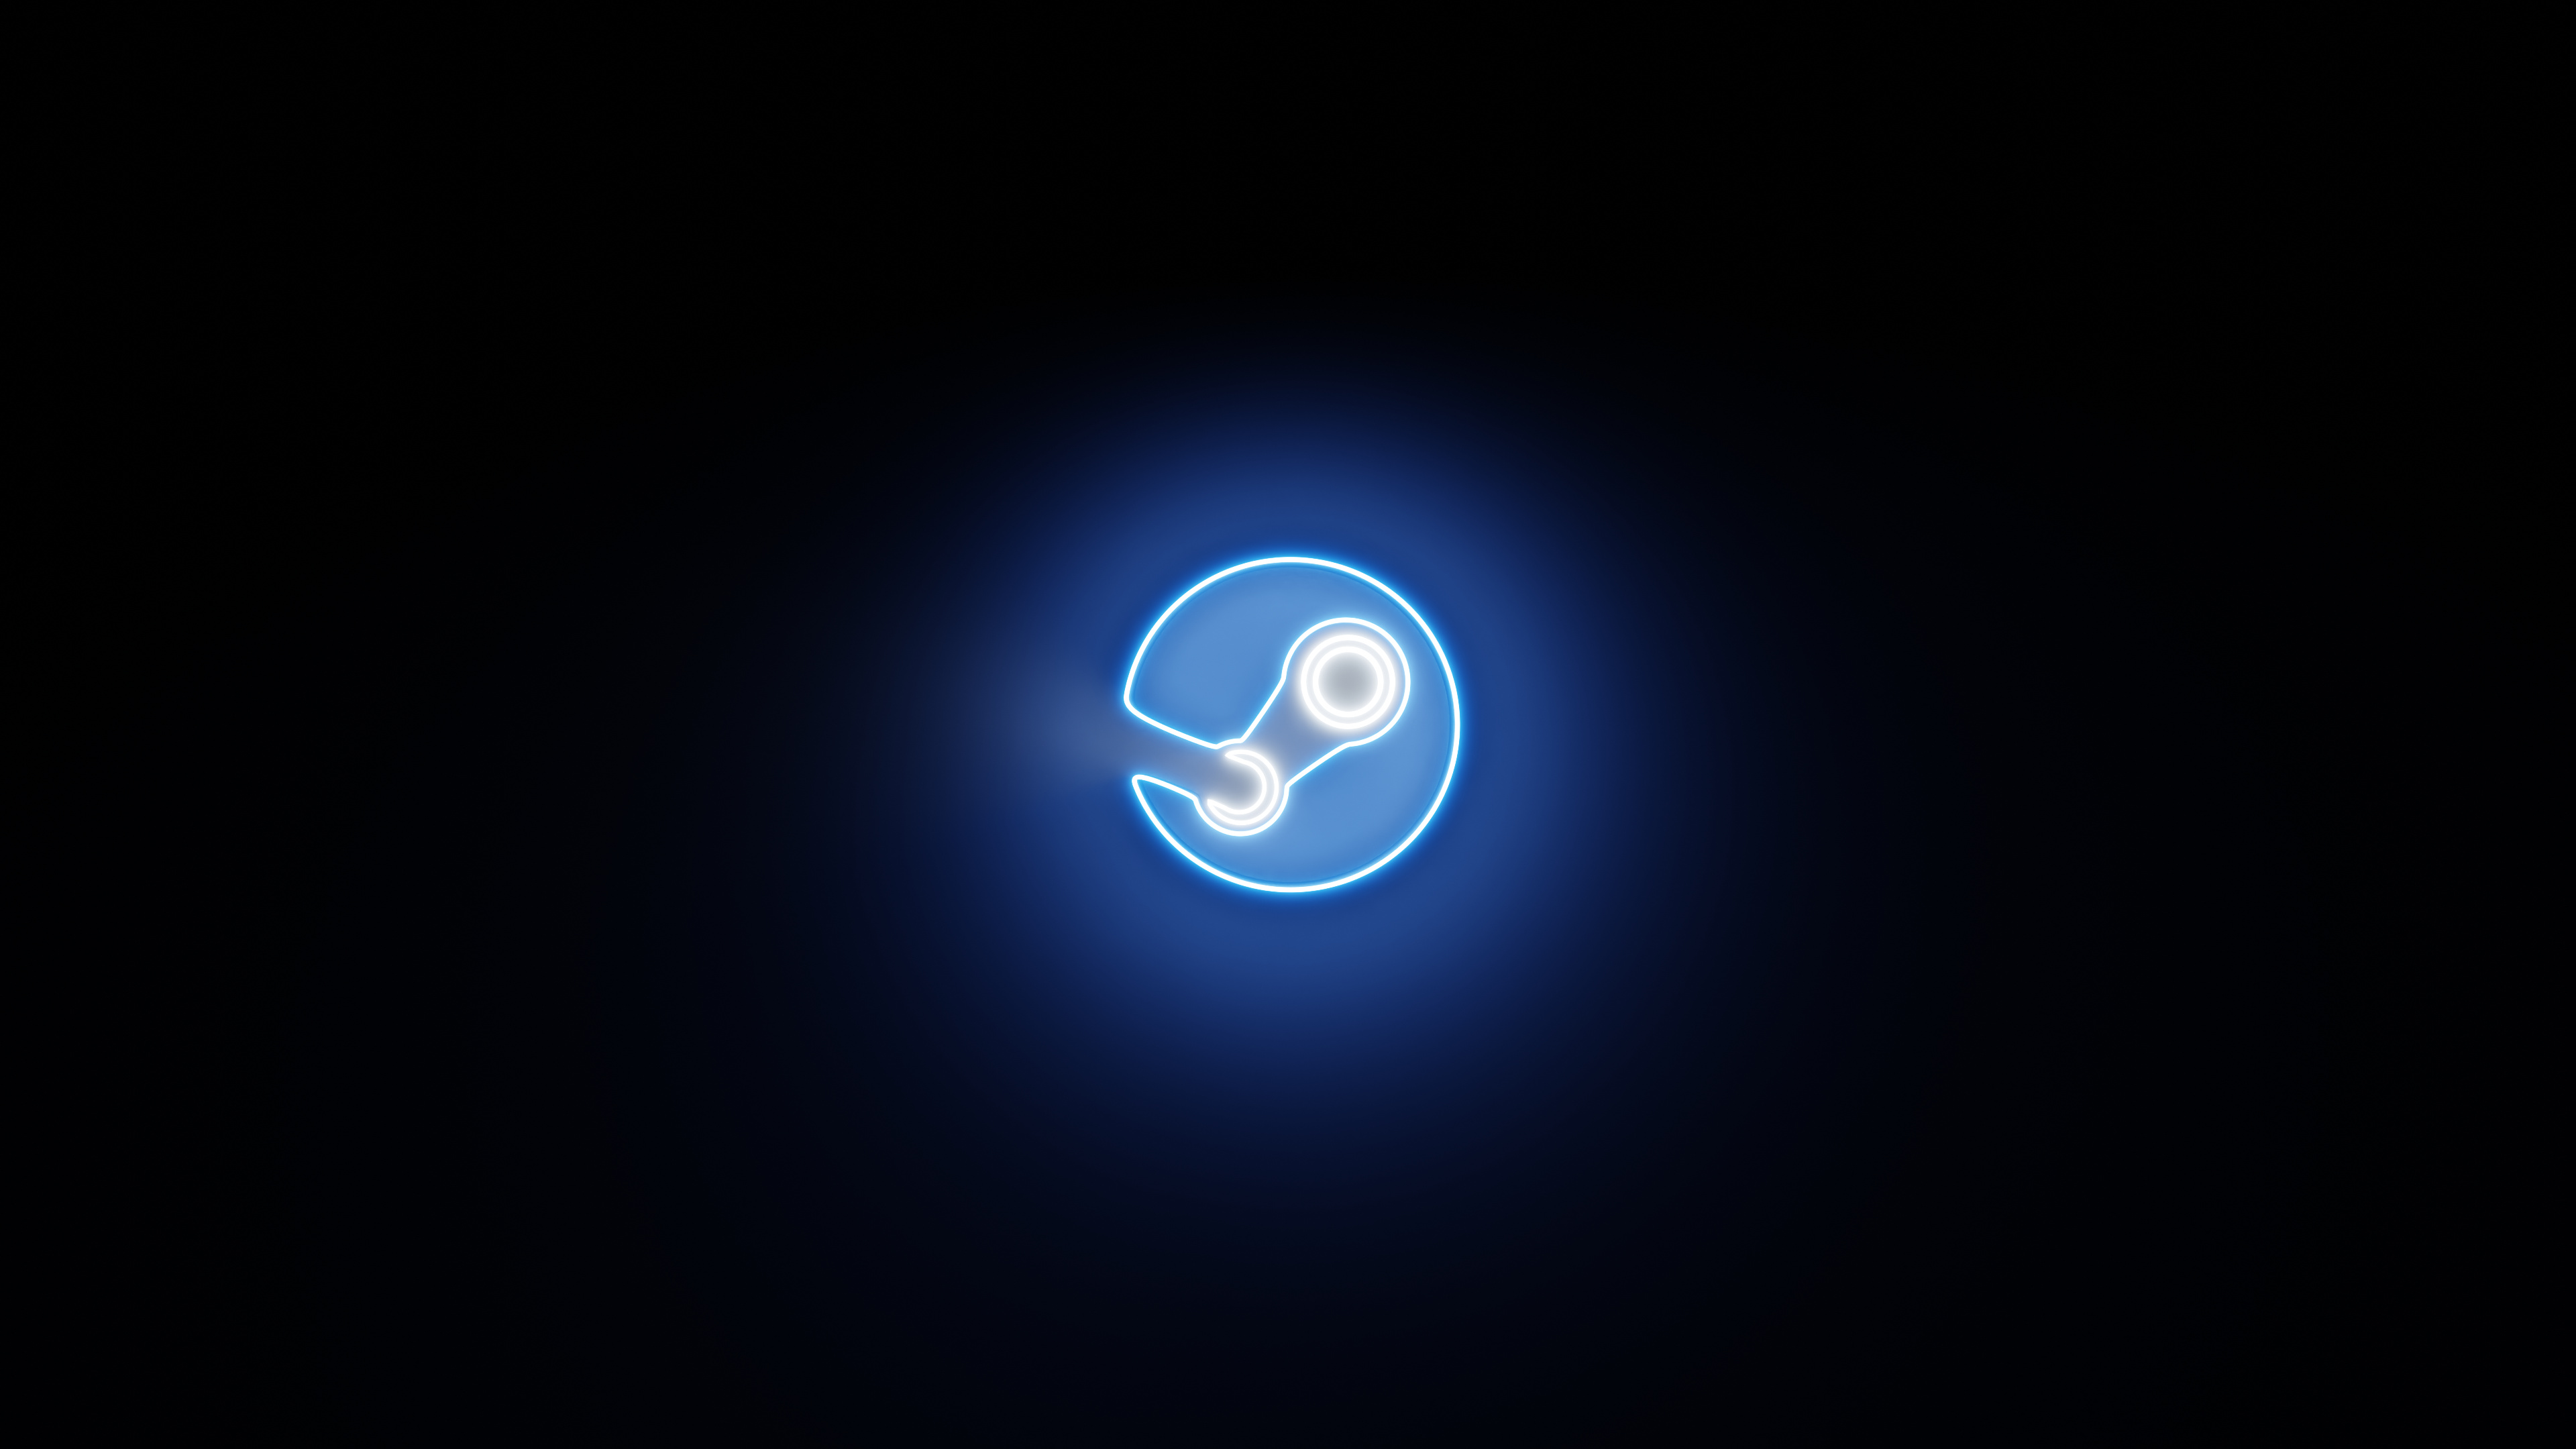 Steam: A gaming distribution platform for Windows, Mac and Linux from Valve Corporation. 3840x2160 4K Wallpaper.